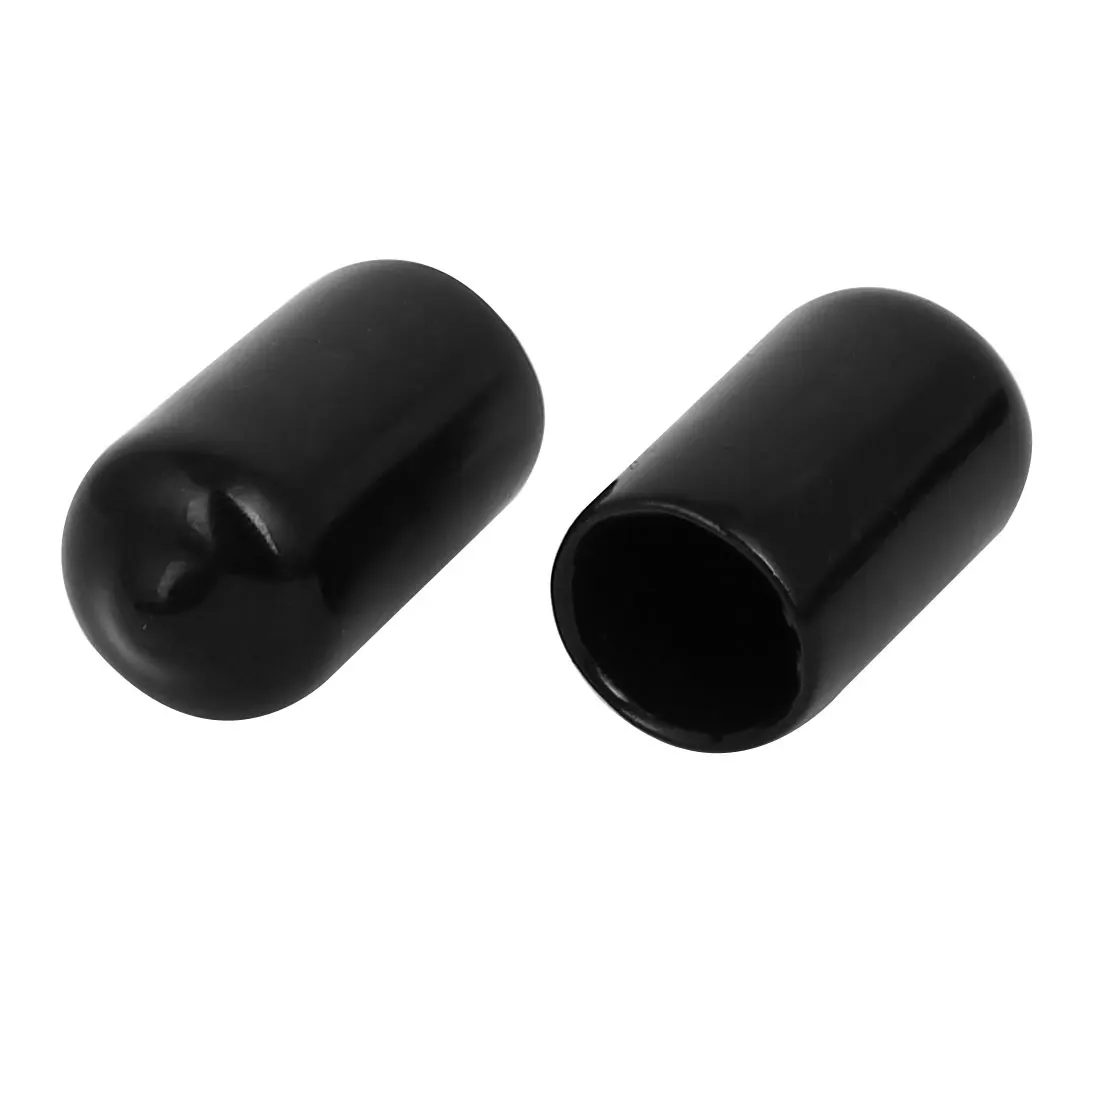 

100pcs 10-15mm Inner Dia Rubber Hose End Cap Screw Thread Protector Cover Insulated End Cap Push-fit Caps for Pipe Round Black